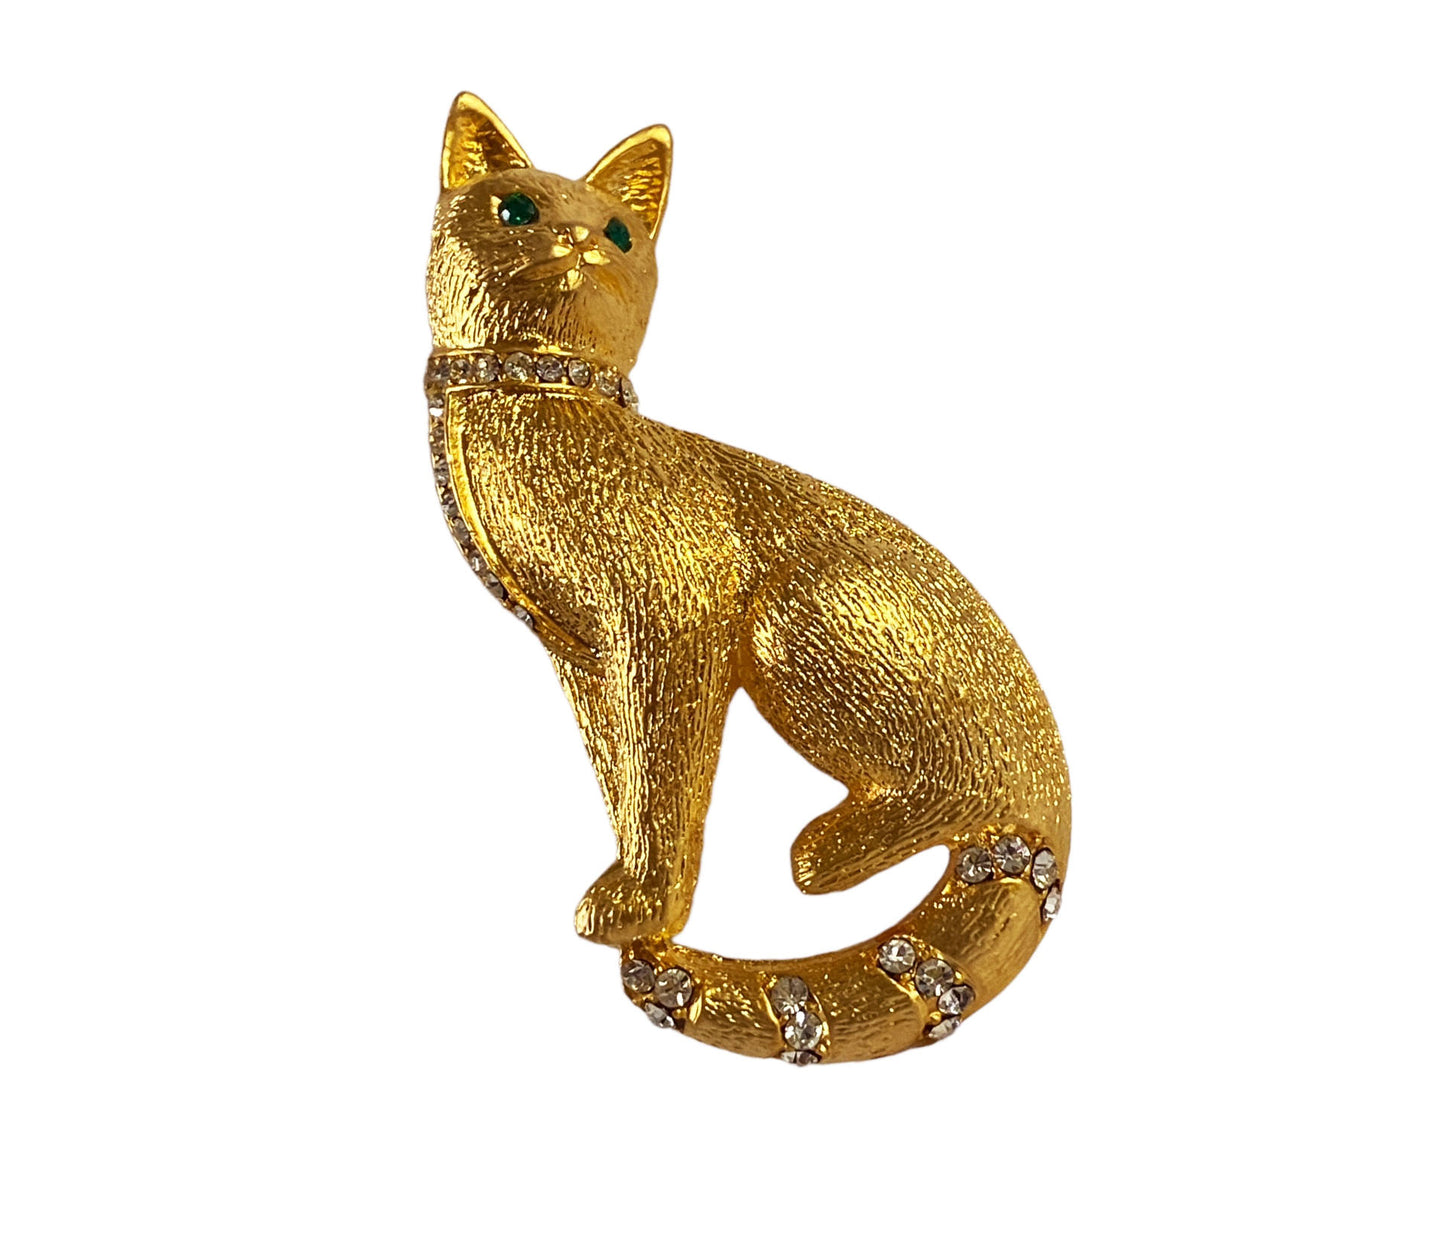 #5933 Vintage Gold Toned Cat Brooch Pin with Green Eyes 2.75" H